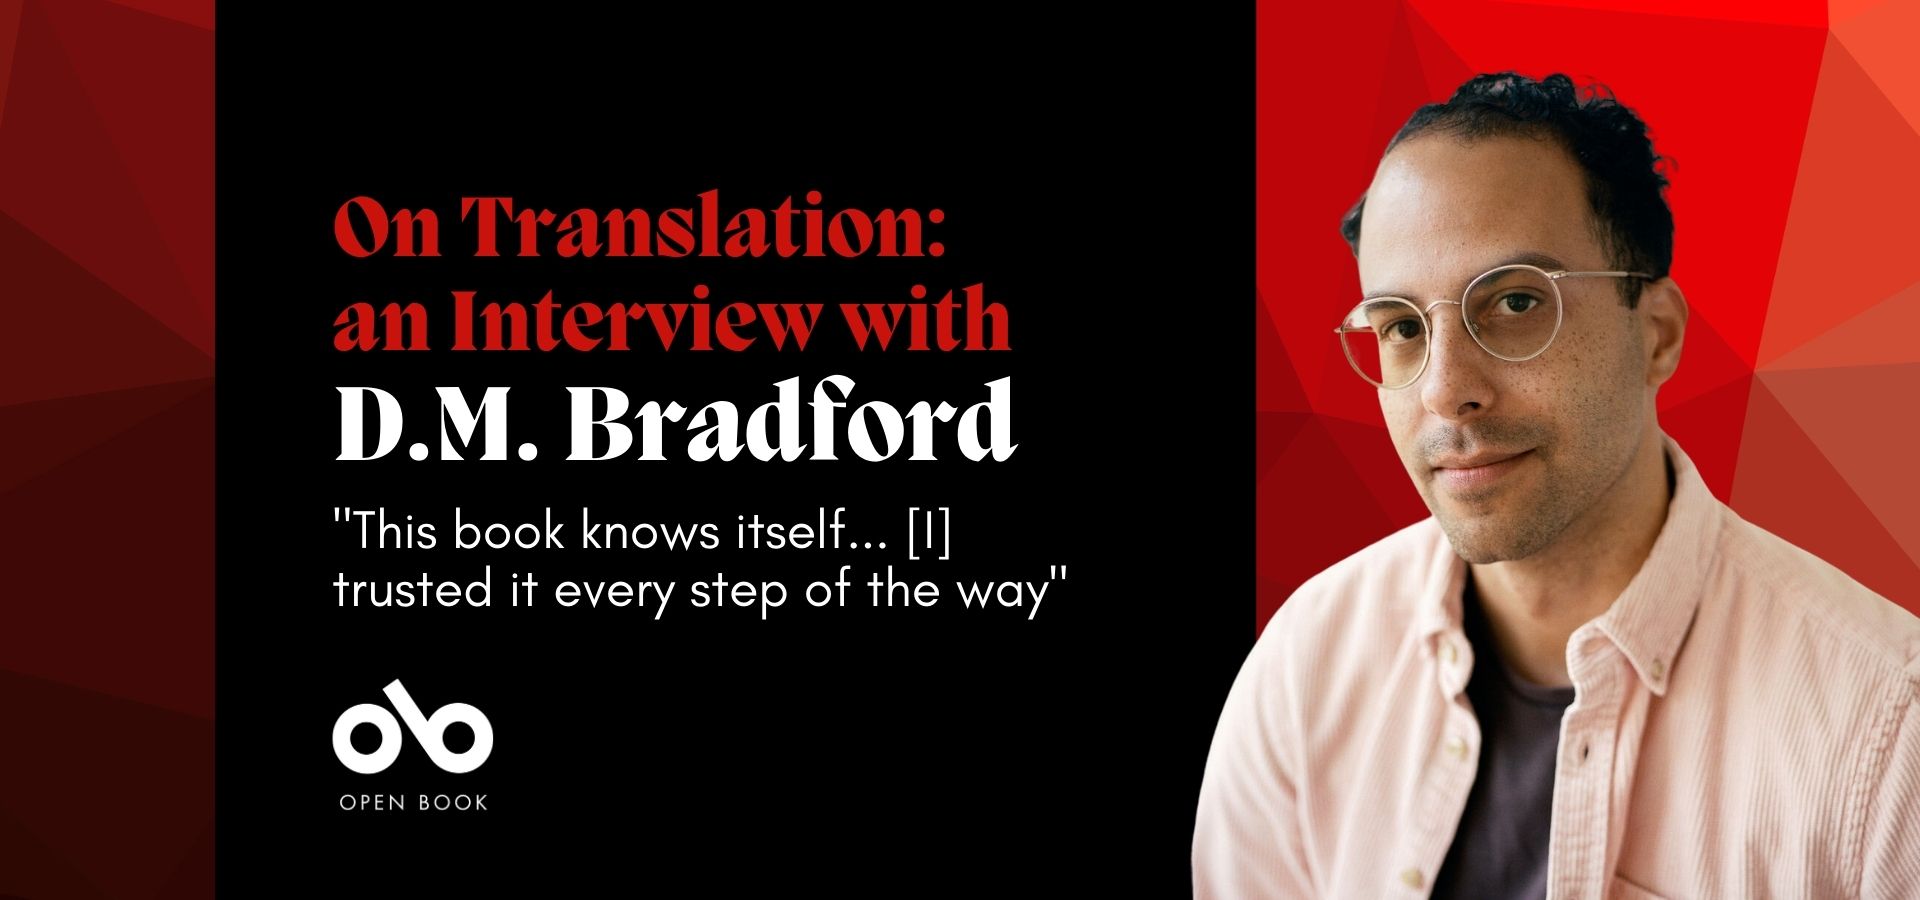 Black and red banner image with text reading "On translation an interview with D.M. Bradford" and "This book knows itself... [I] trusted it every step of the way". Photo of D.M. Bradford on the right side, Open Book logo on the left side